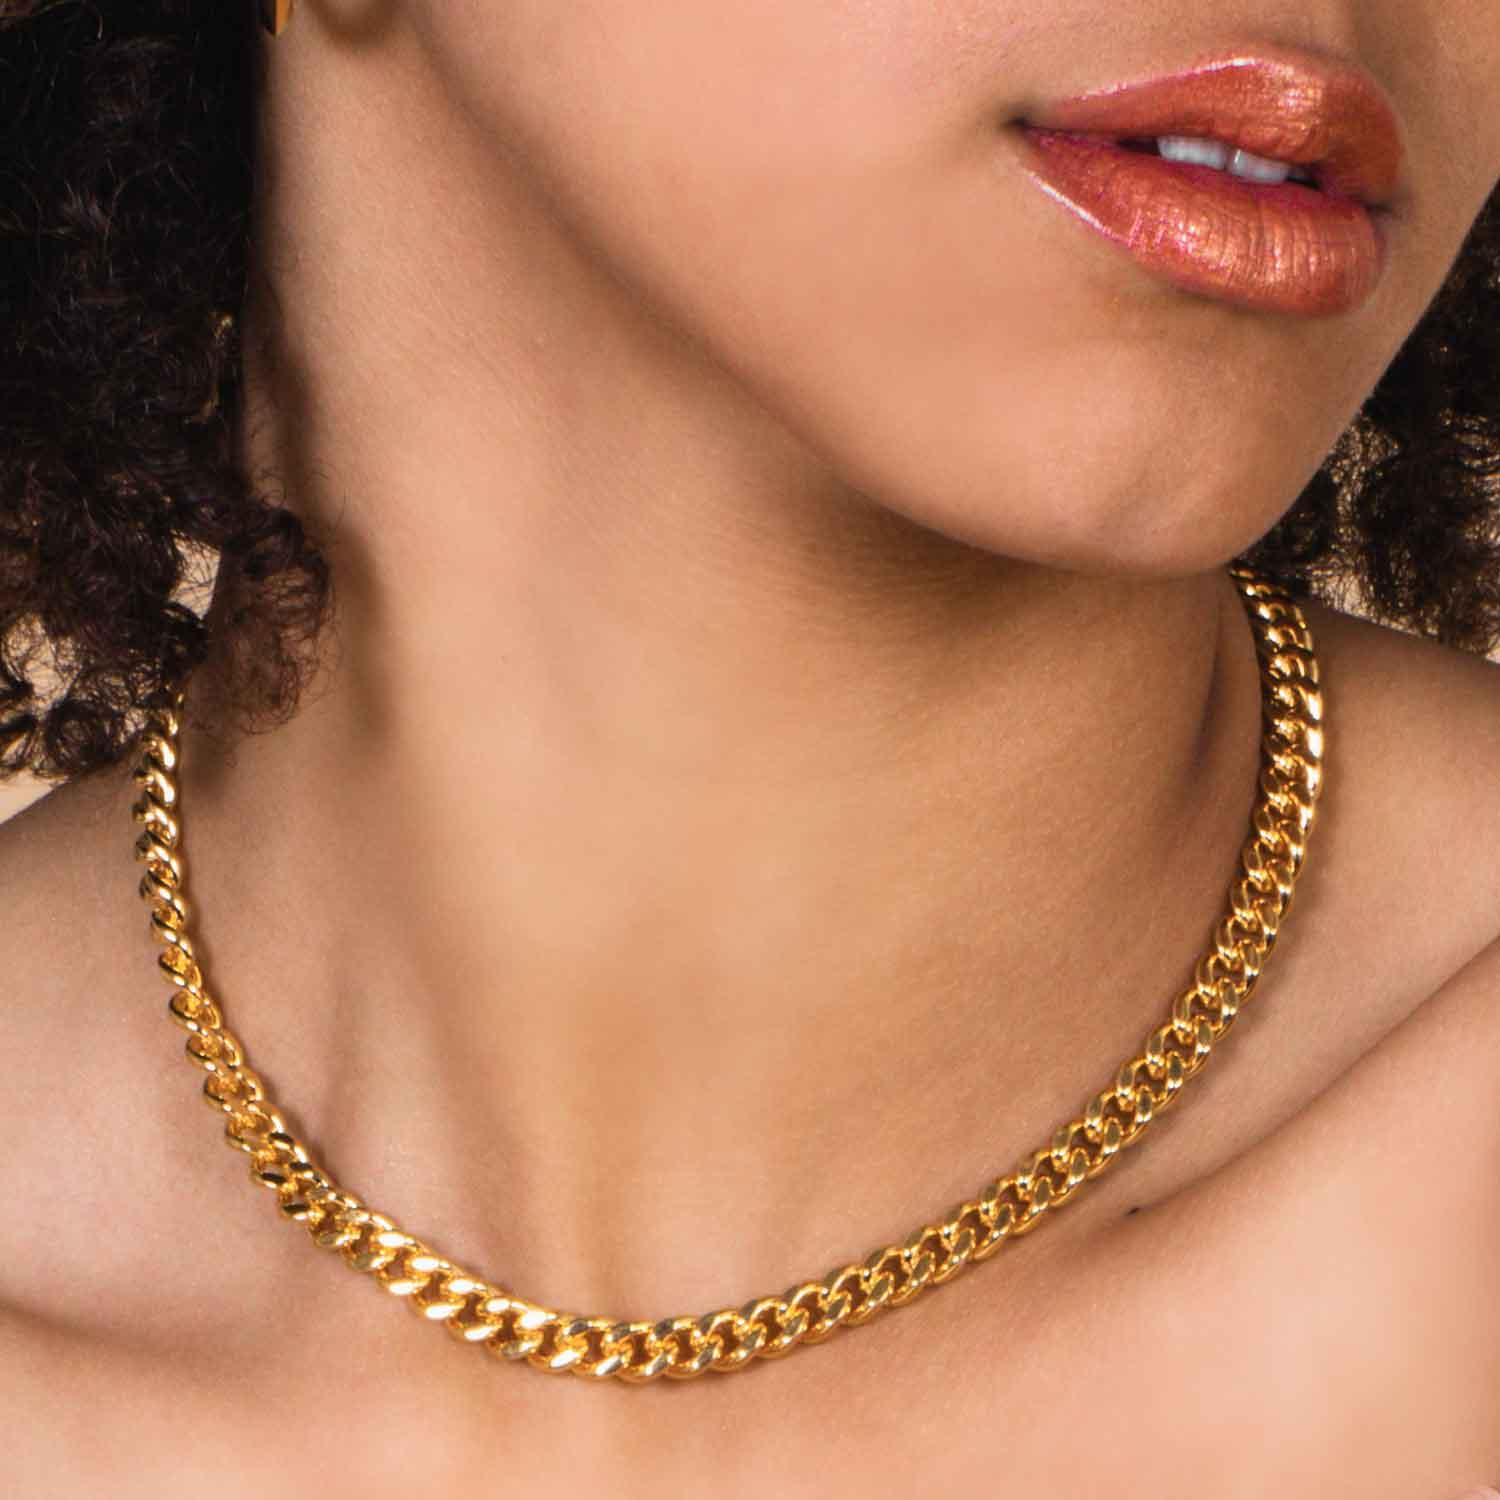 Gold Plated Curb Chain Necklace - Juulry.com